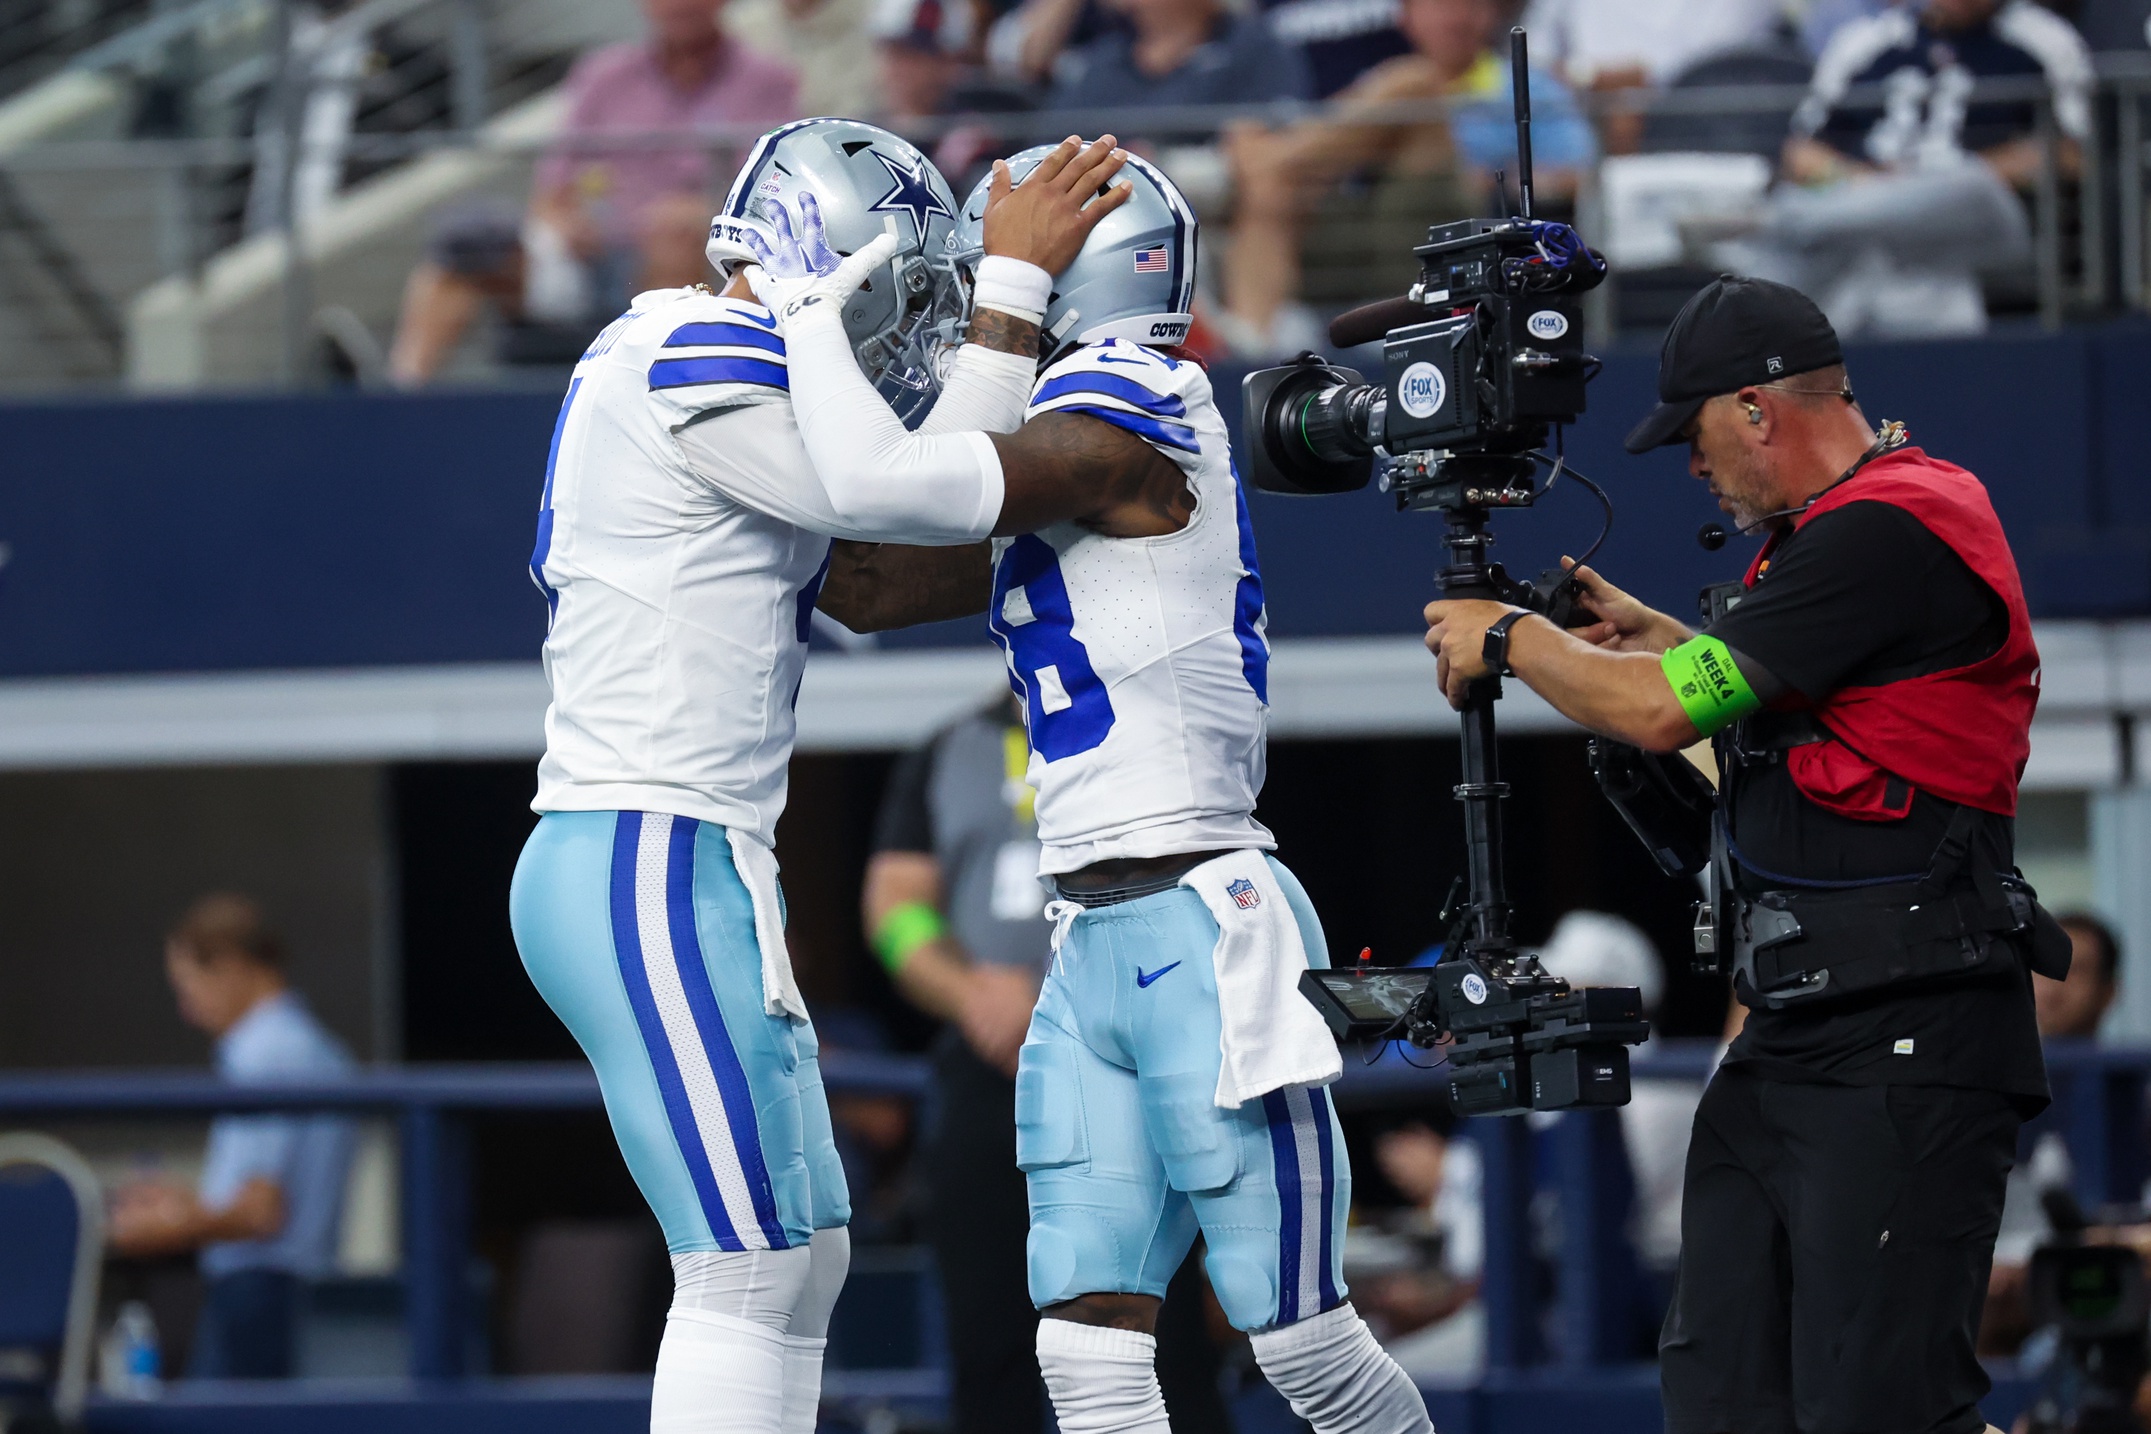 5 Important Stats and Players To Watch During The Dallas Cowboys vs